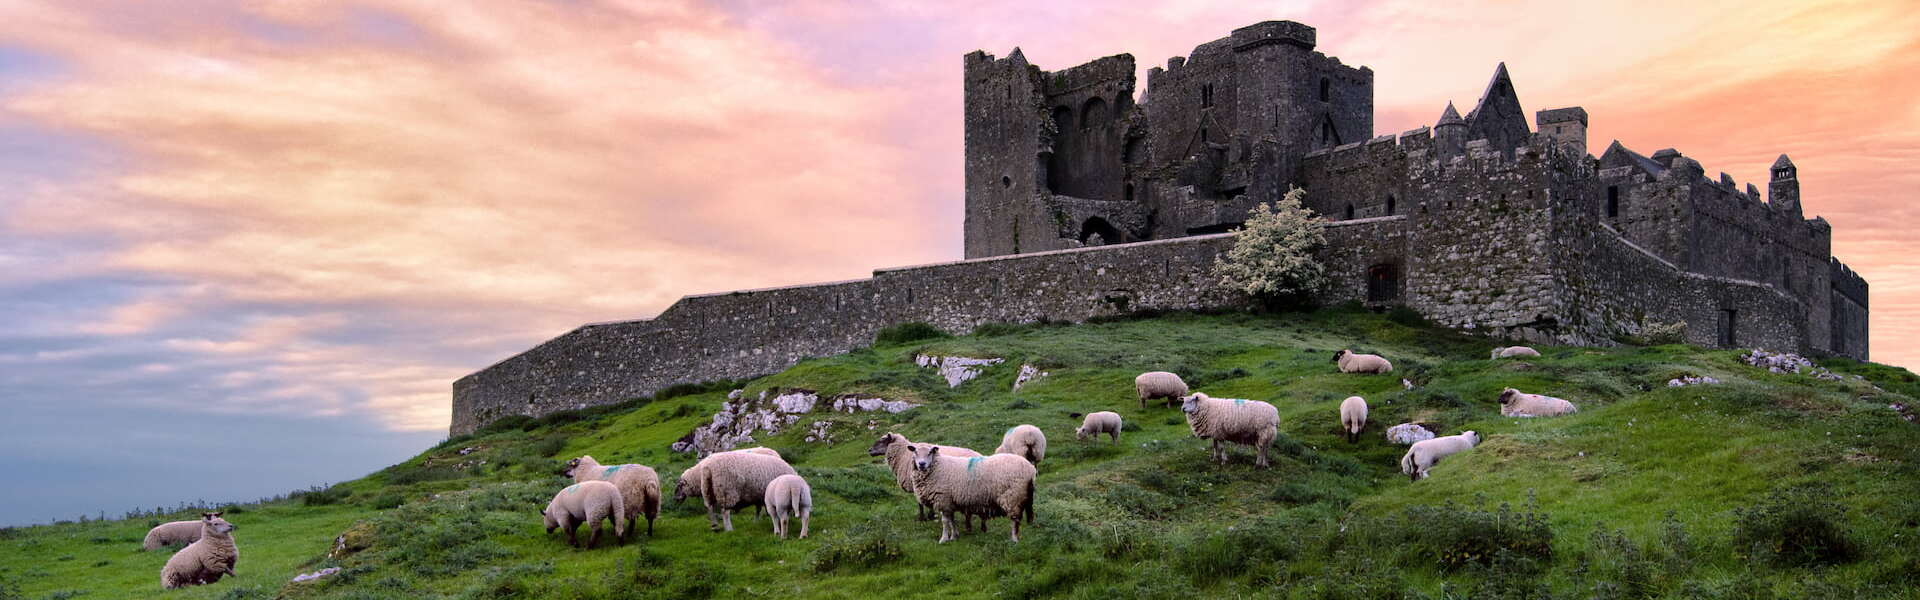 Rock of Cashel on the hill with a sunset and lambs grazing in the grass